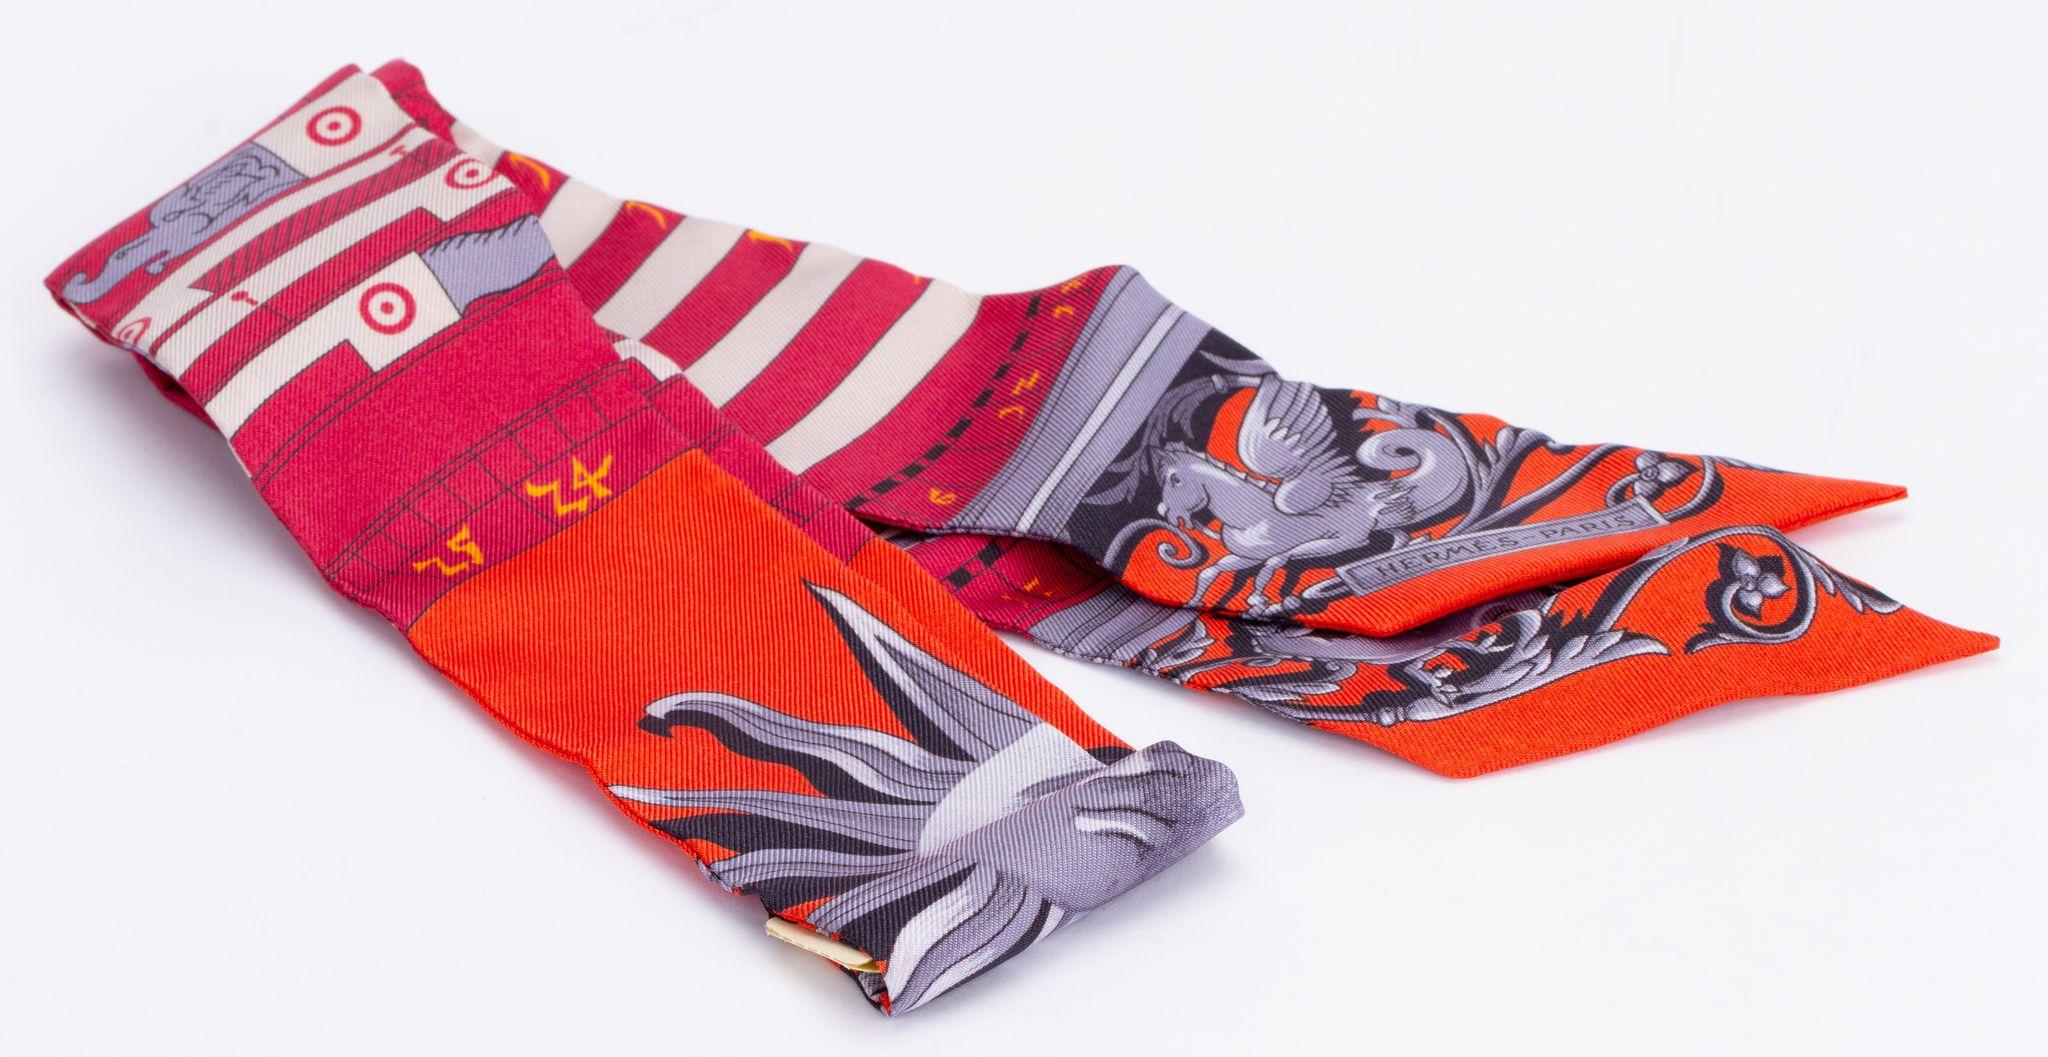 New Hermès Sun Twilly. The scarf is made out of silk and the main color is red. The print shows a sun in grey. The piece comes with a scarf ring. It is packed in the original box and ribbon.